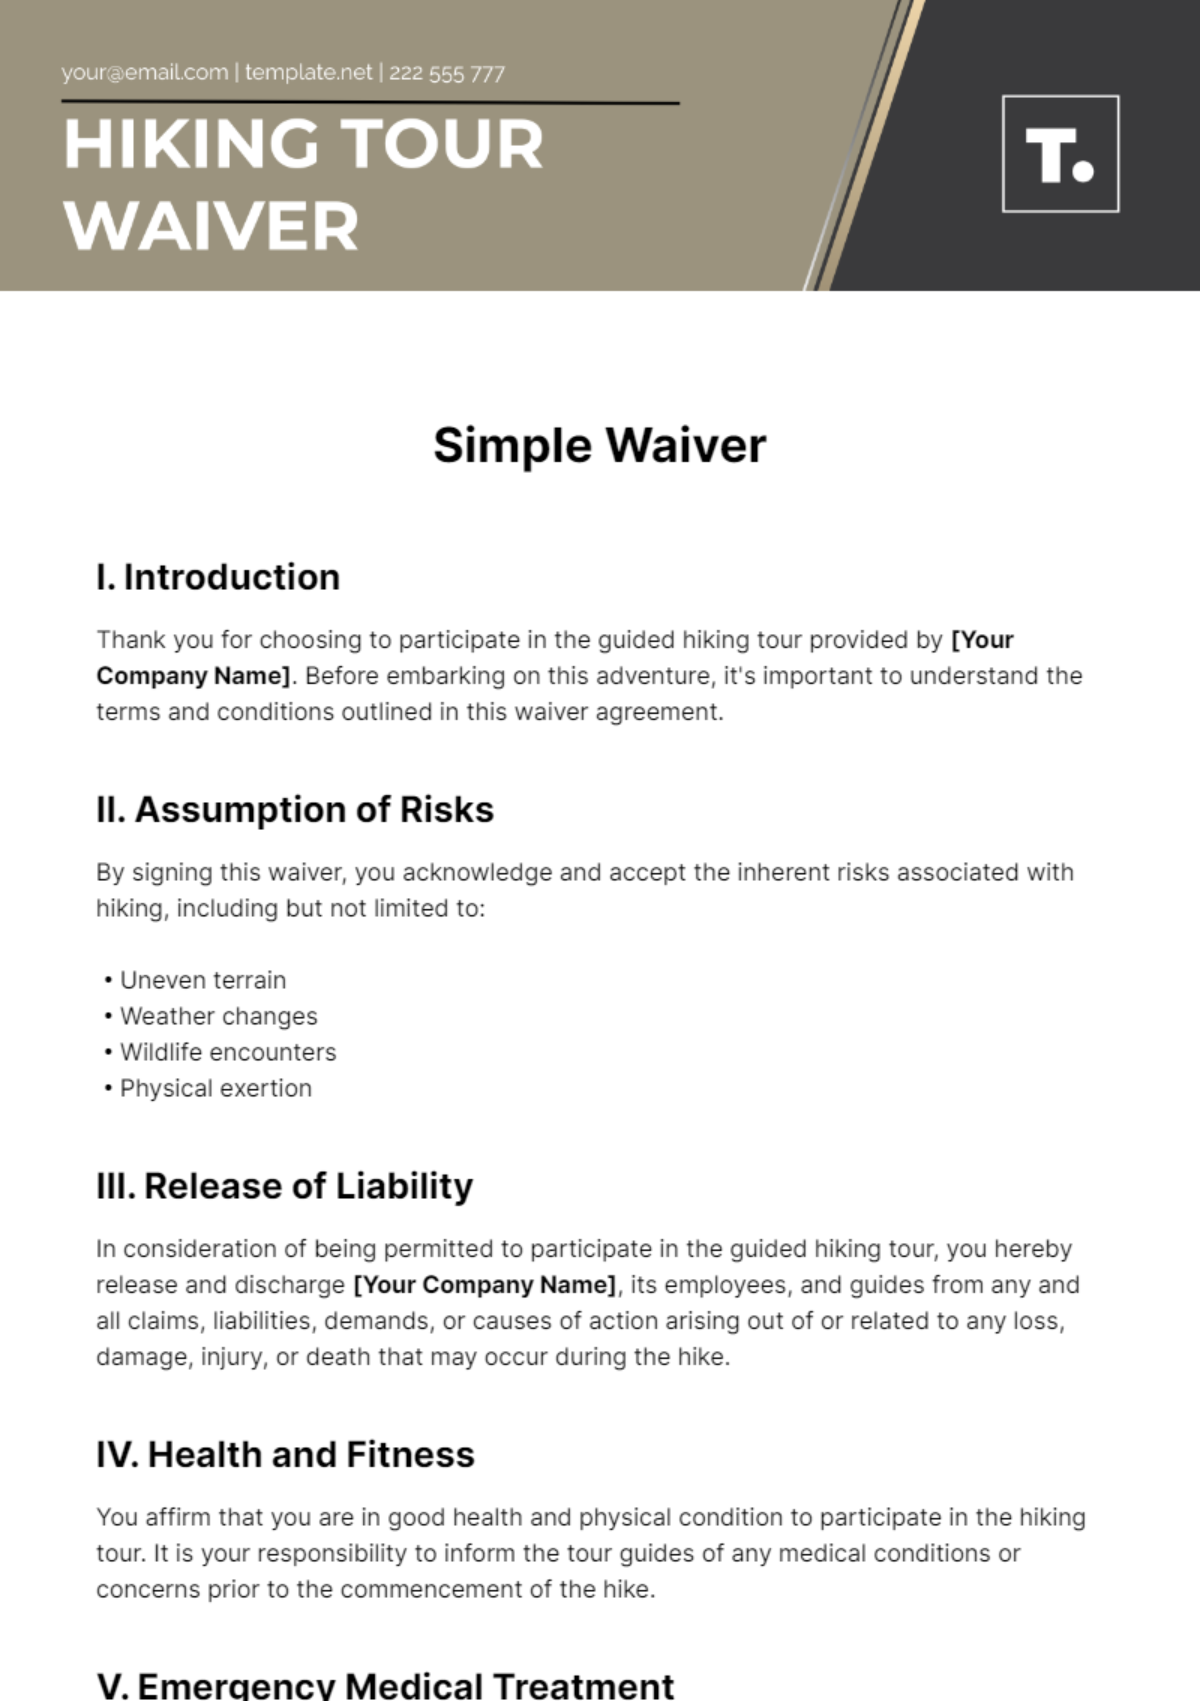 Simple Waiver Template